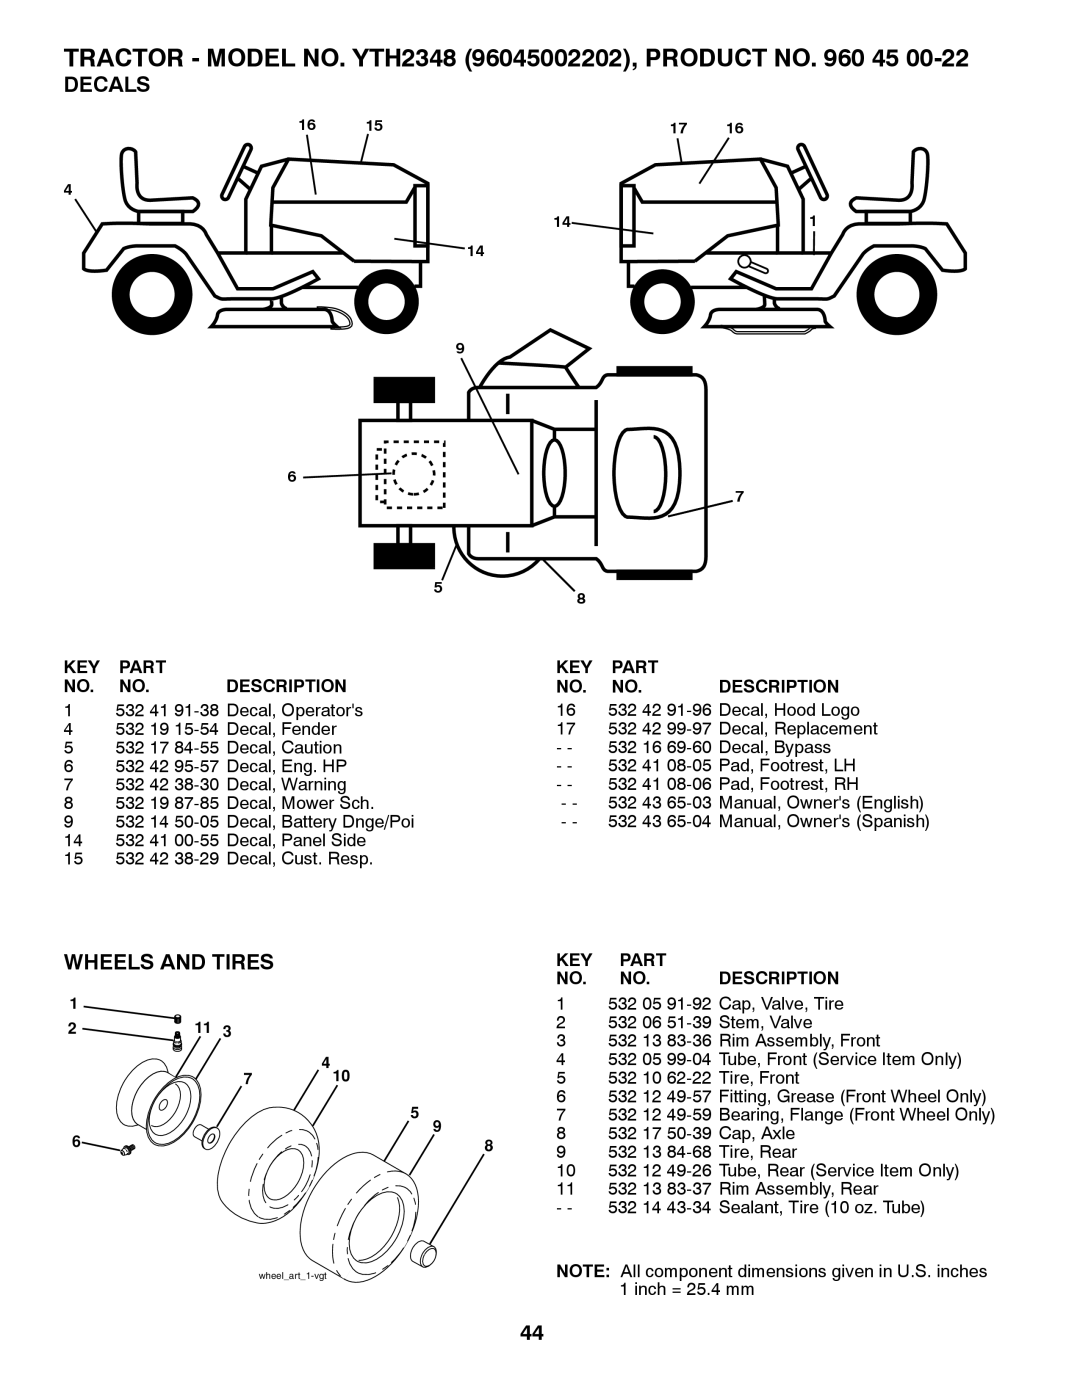 Husqvarna 532 43 65-03 owner manual Decals, Wheels And Tires, TRACTOR - MODEL NO. YTH2348 96045002202, PRODUCT NO. 960 